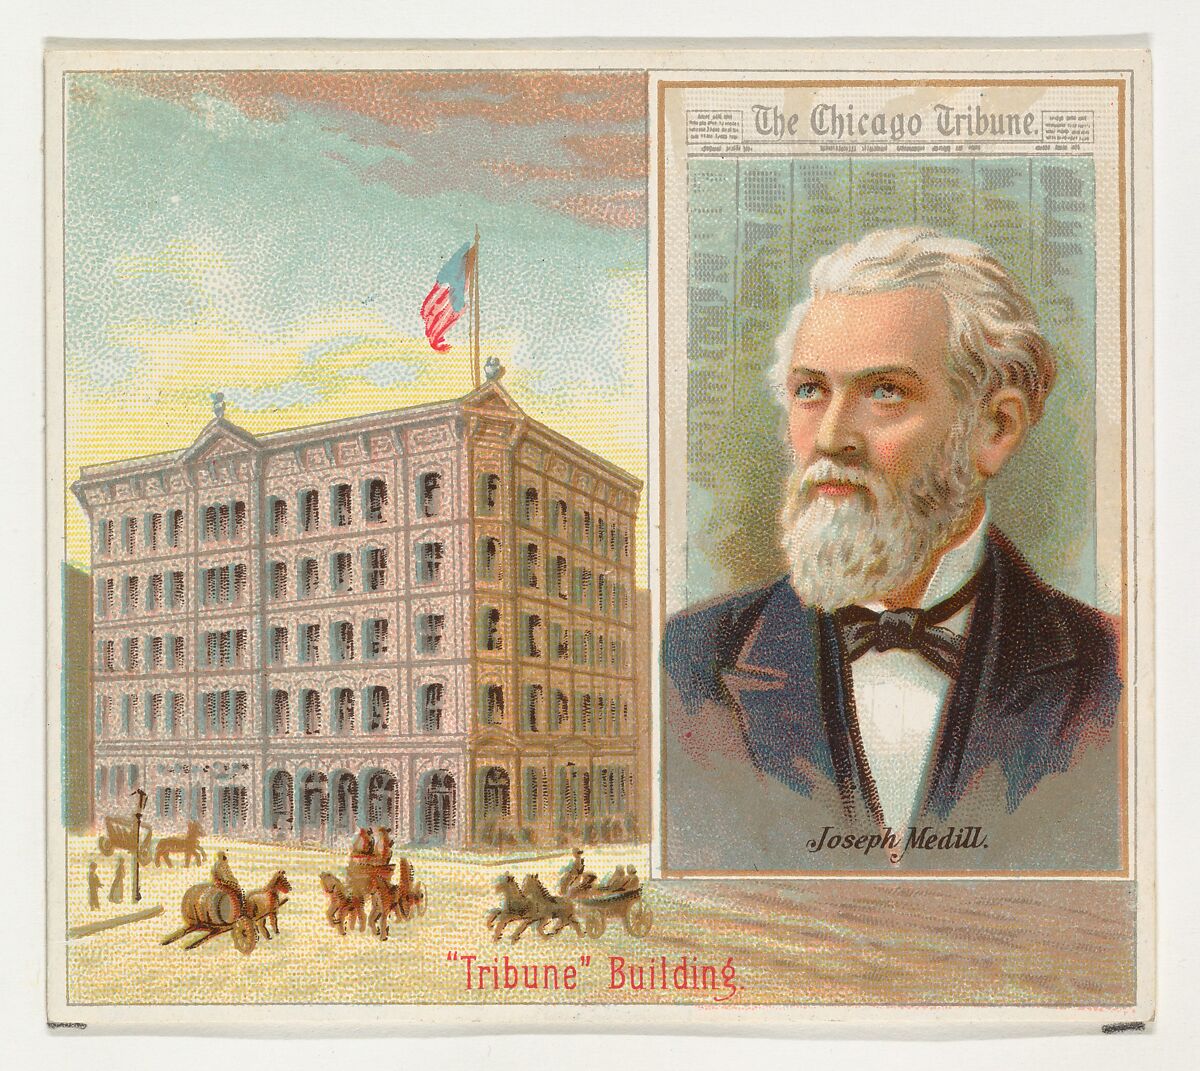 Joseph Medill, The Chicago Tribune, from the American Editors series (N35) for Allen & Ginter Cigarettes, Issued by Allen &amp; Ginter (American, Richmond, Virginia), Commercial color lithograph 